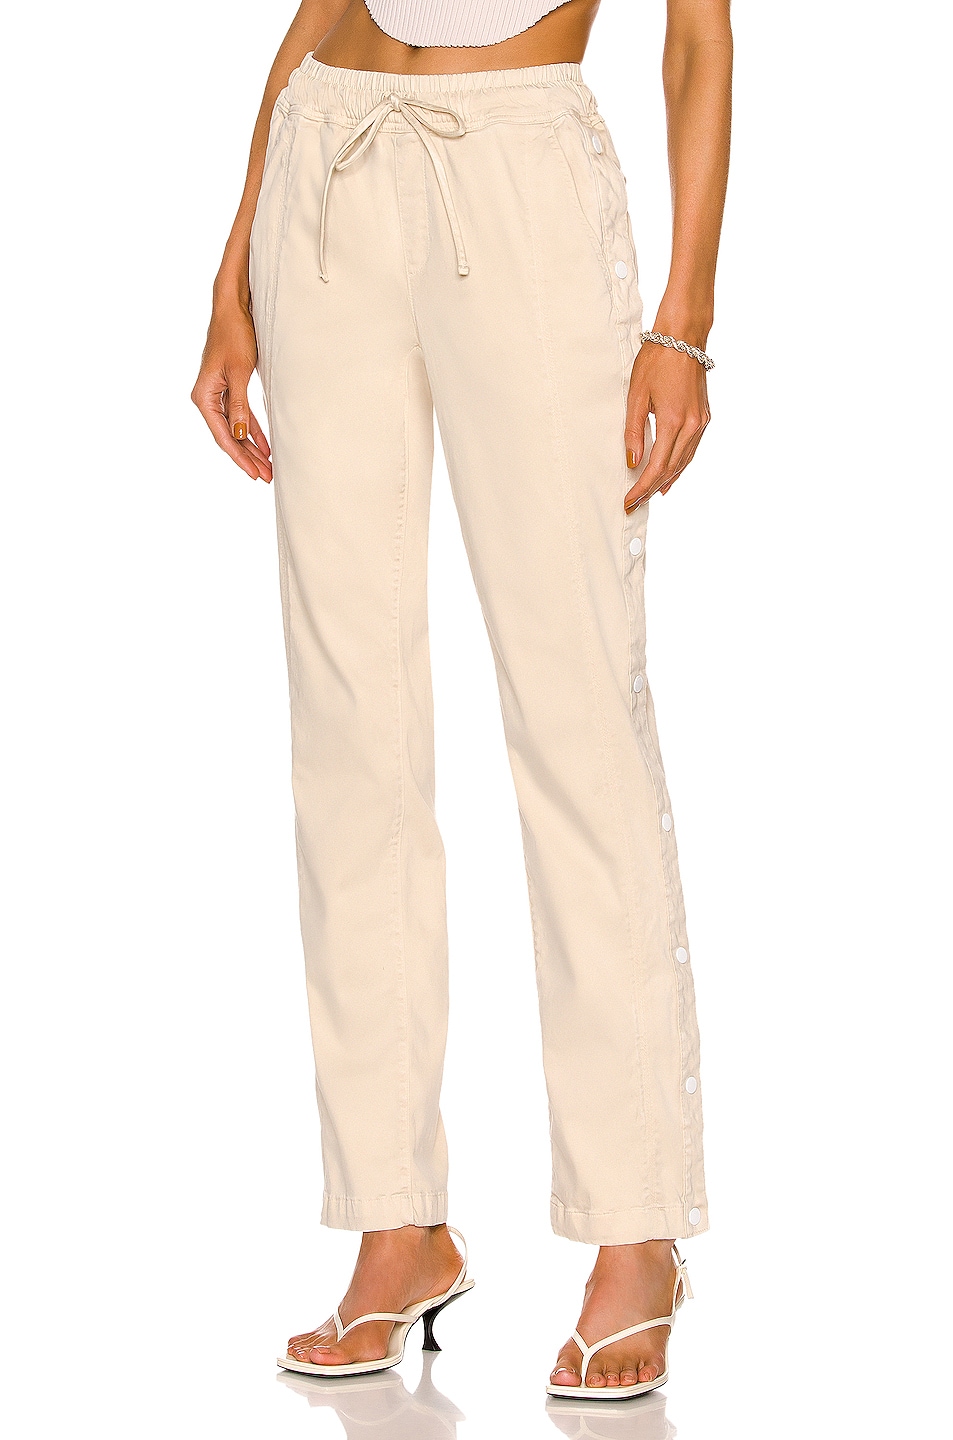 Image 1 of COTTON CITIZEN The London Snap Pant in Oatmeal